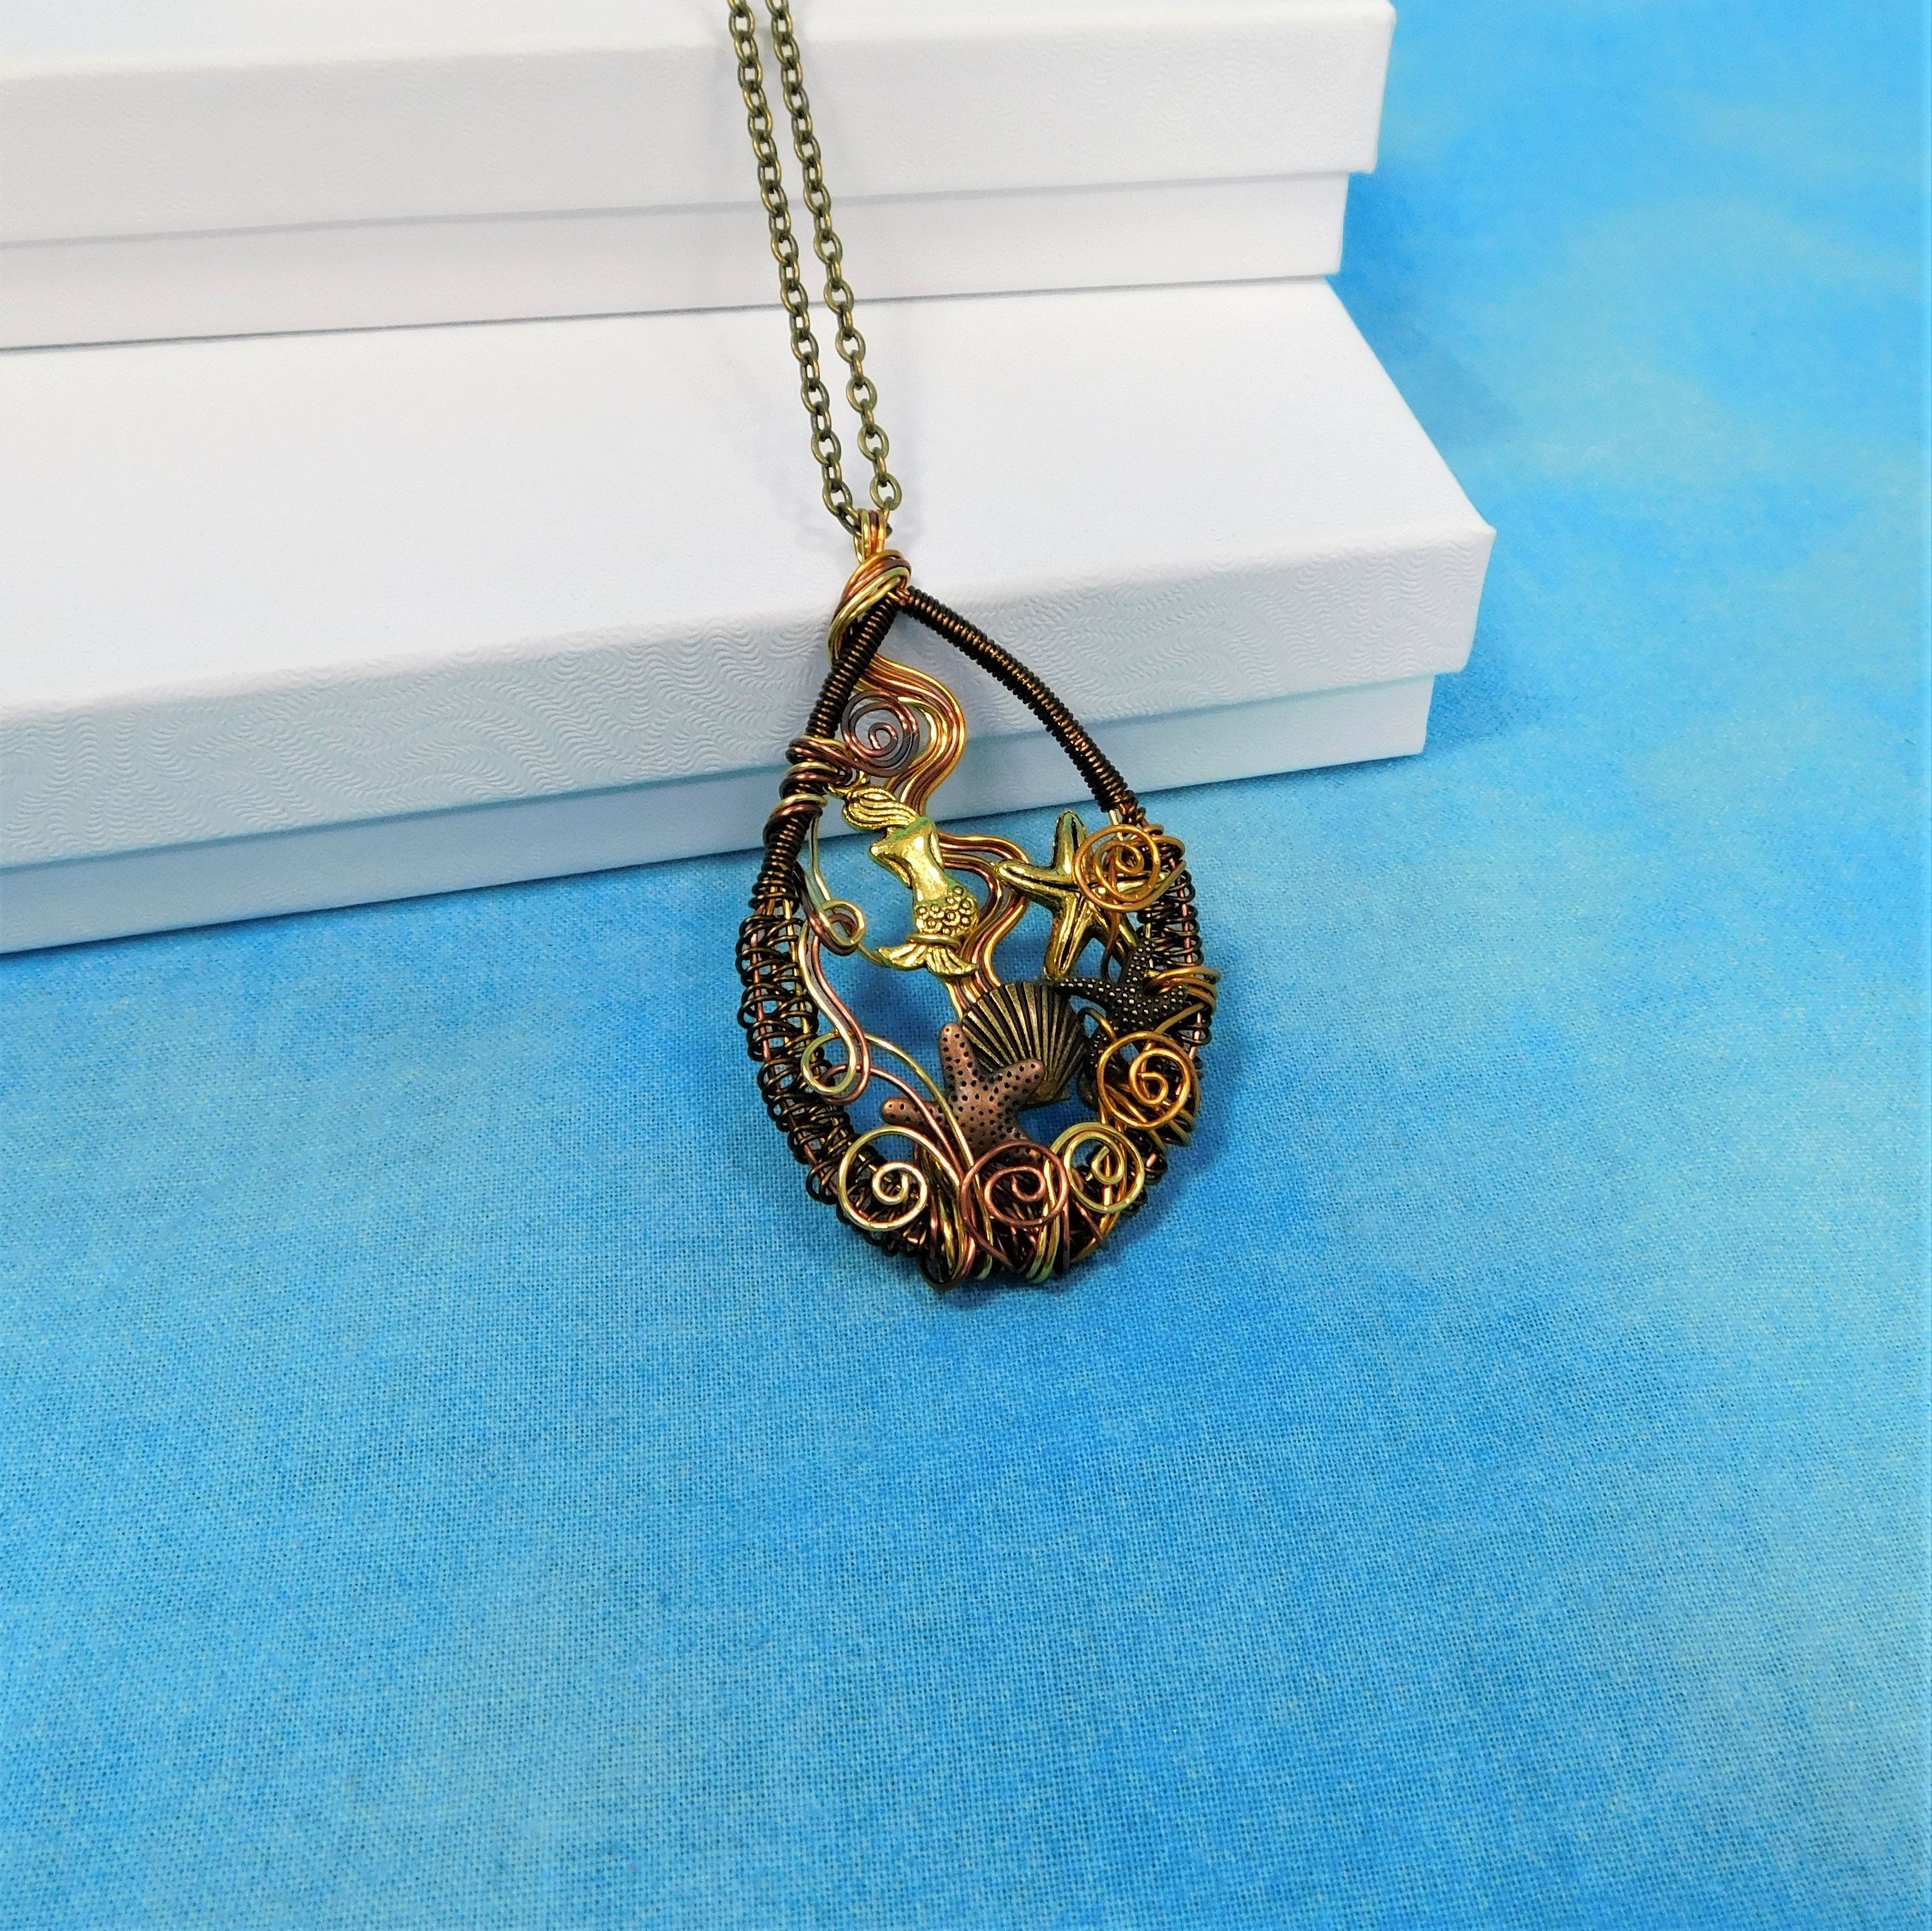 Mermaid Necklace Beach Theme Jewelry, Unique Woven Wire Wrapped Ocean ...